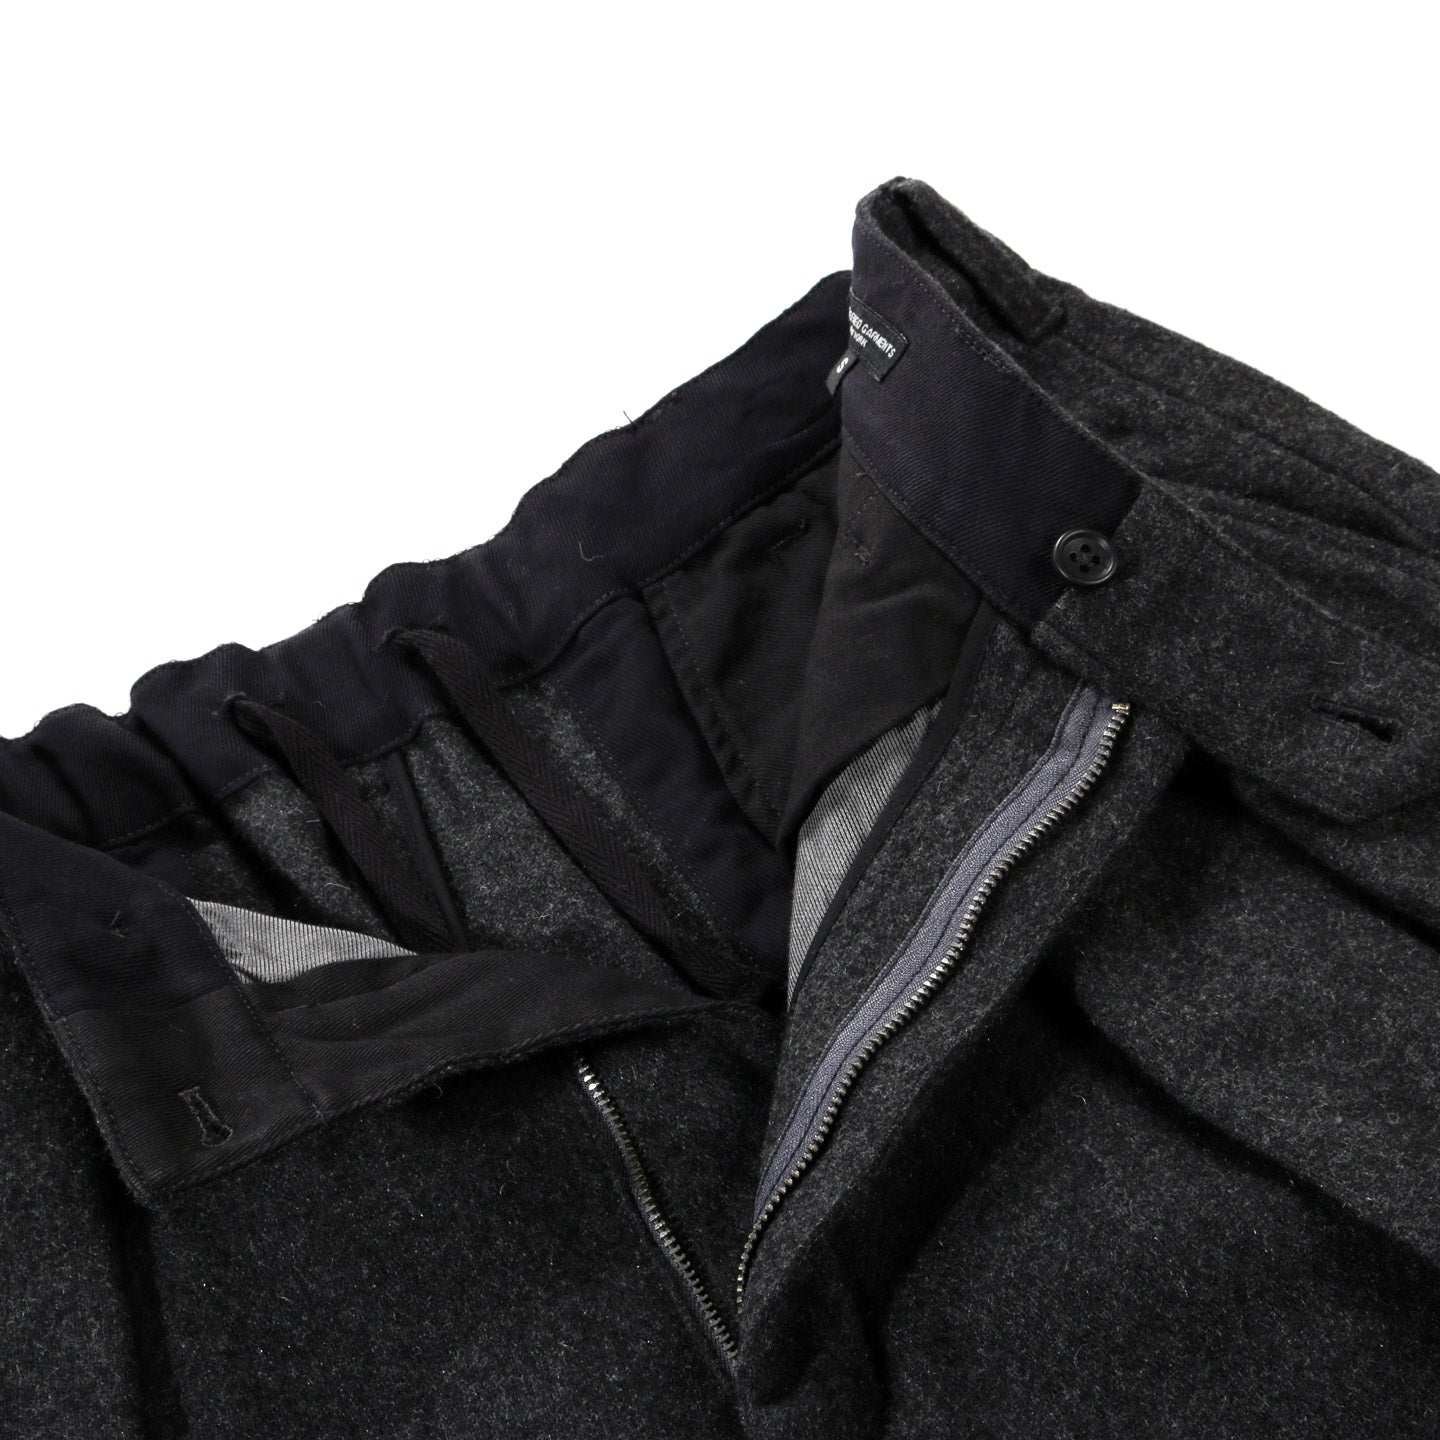 ENGINEERED GARMENTS OXFORD PANT GREY SOLID POLY WOOL FLANNEL